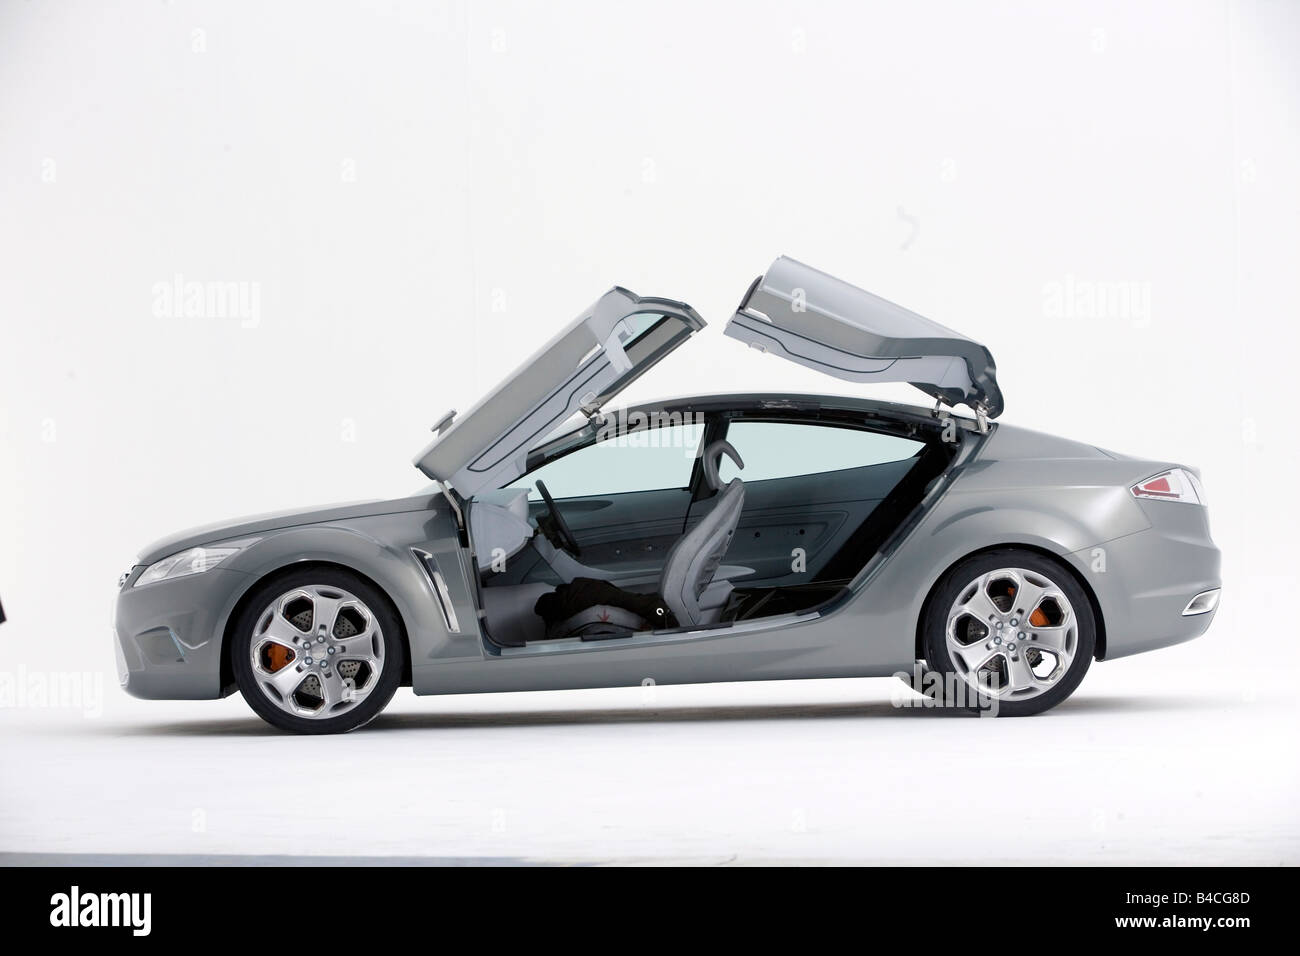 Car, Ford Iosis IAA 2005 Study, silver, roadster, coupe/Coupe, Studio admission, standing, upholding, side view, open doors Stock Photo